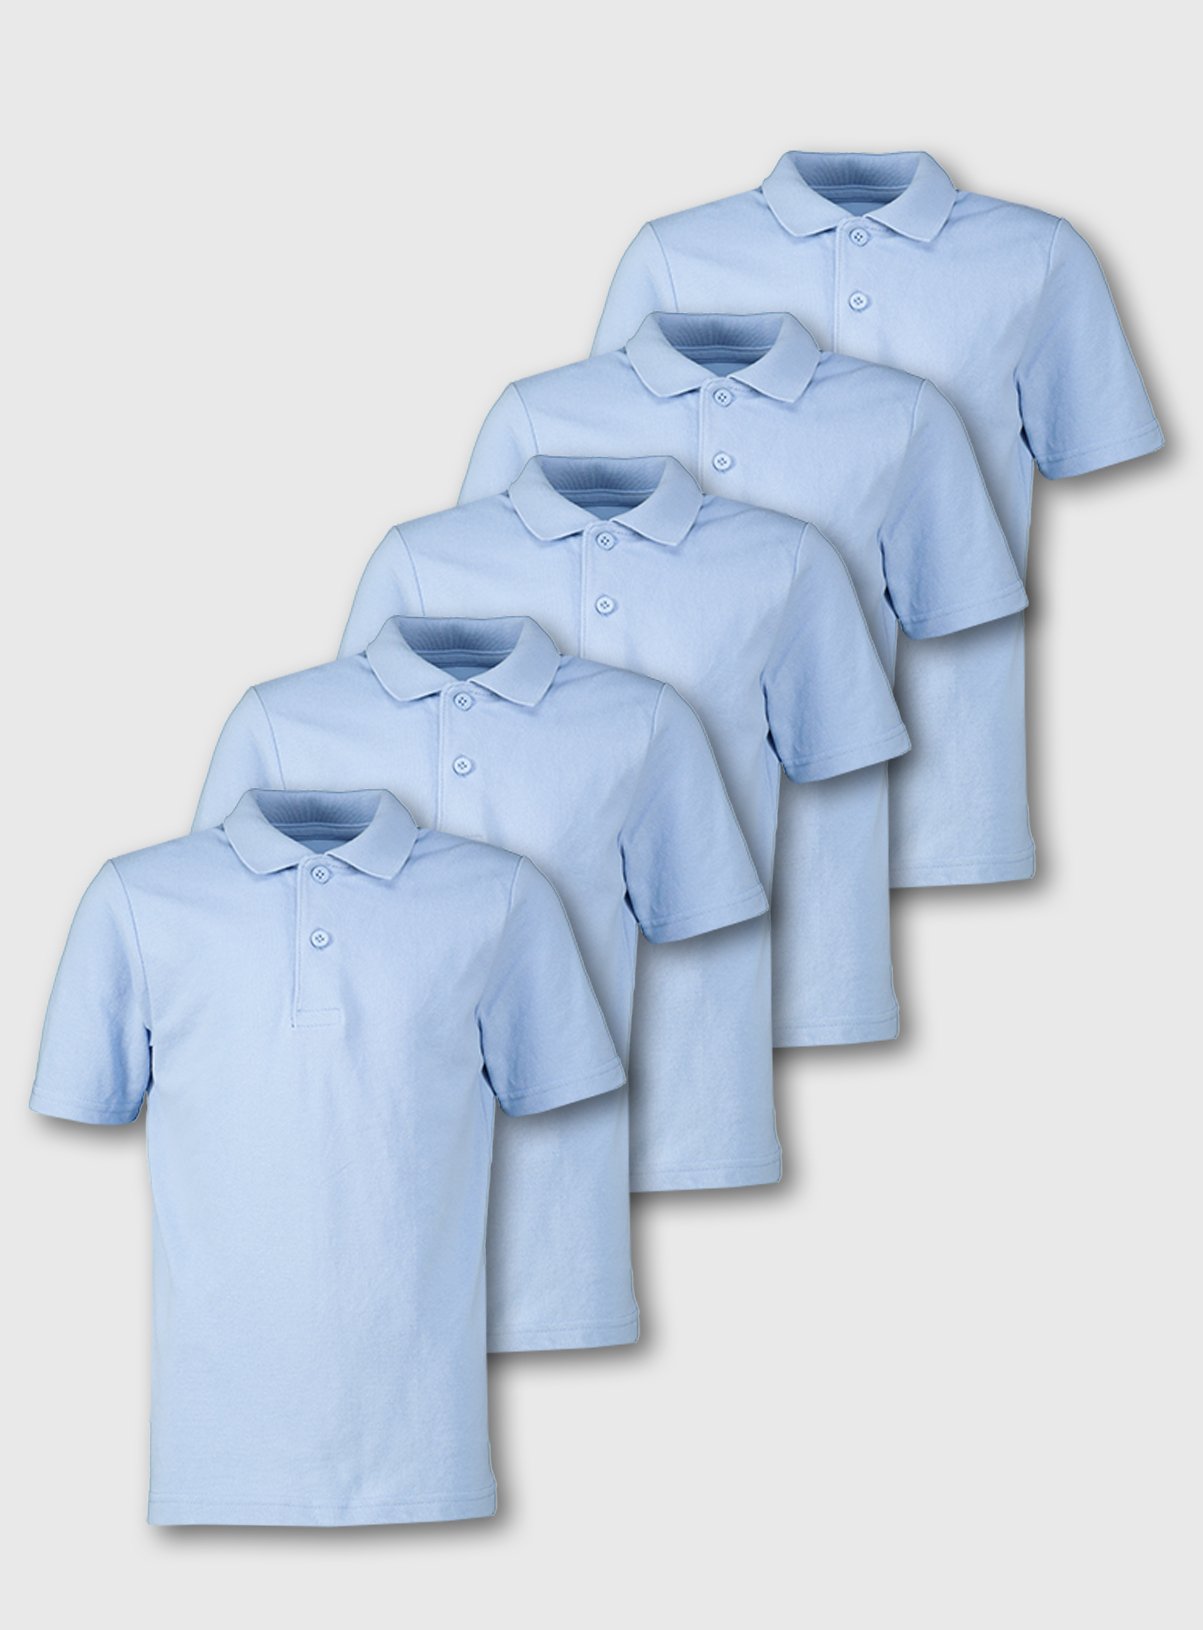 5 pack polo shirts